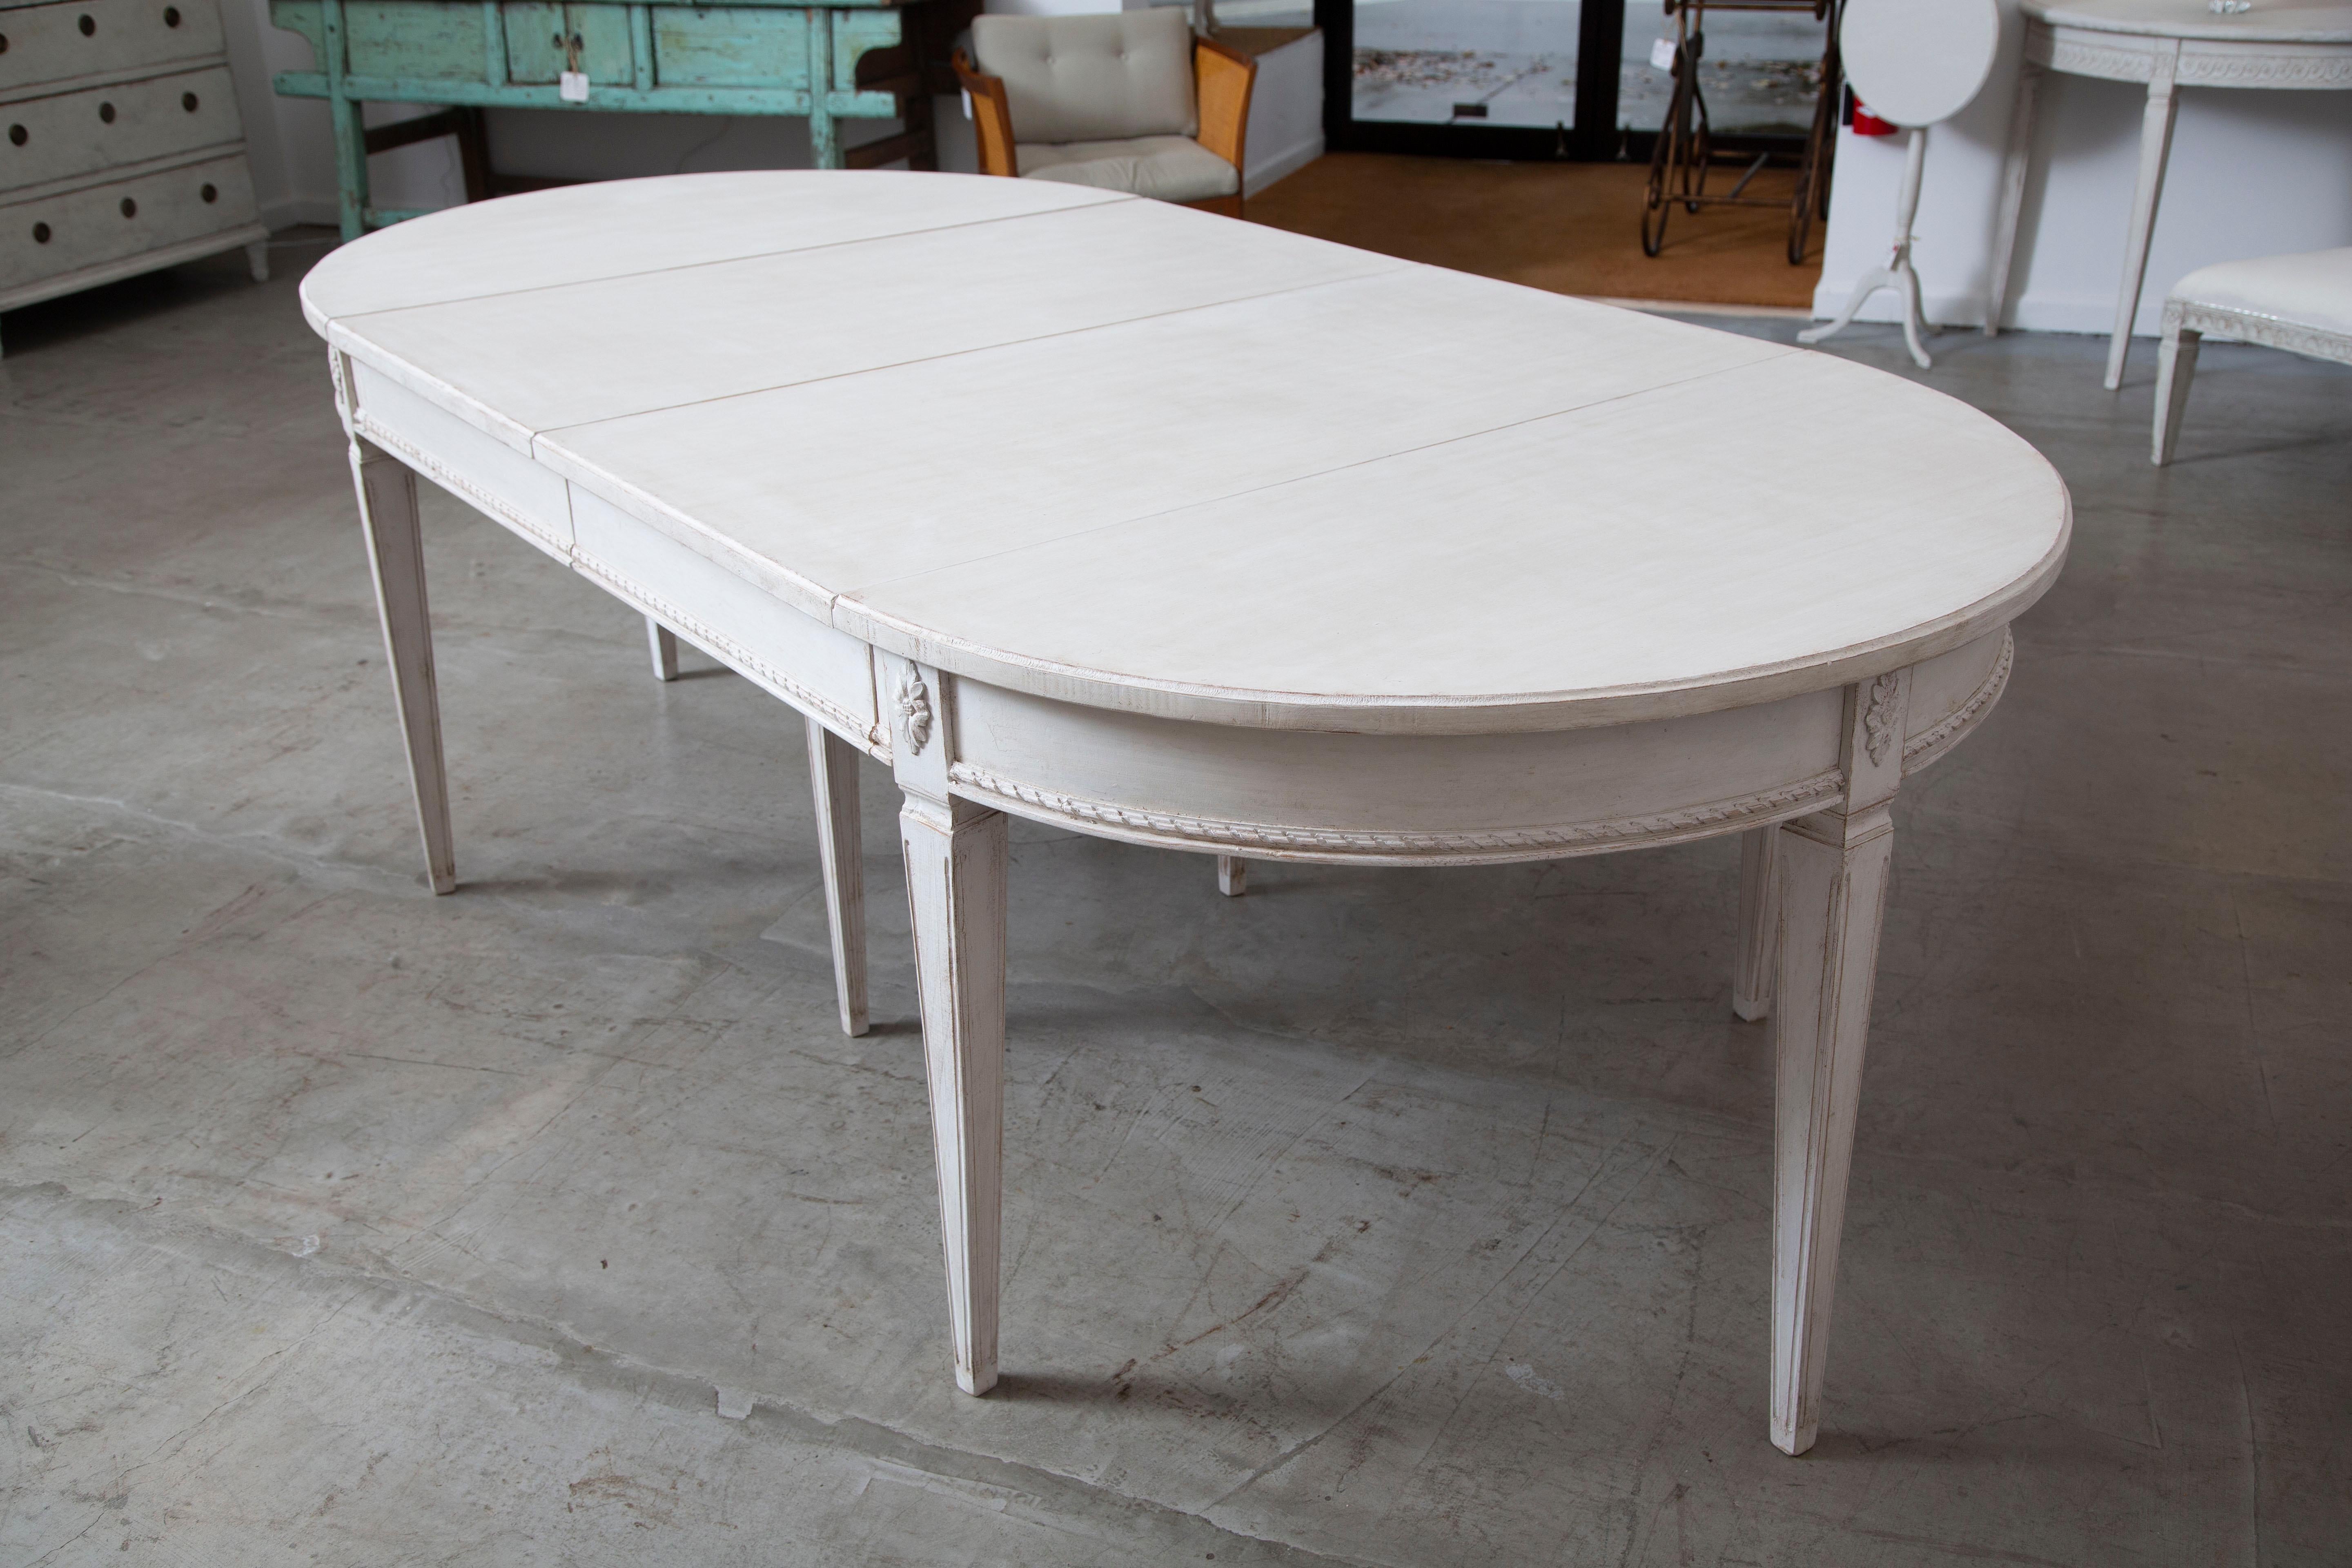 Antique Swedish Gustavian style extension dining table with four leaves, painted in distressed Swedish
creamy white finish, has a lovely patina. Six square tapered fluted legs and one centre support leg. Oval carved rosettes mounted at top of each